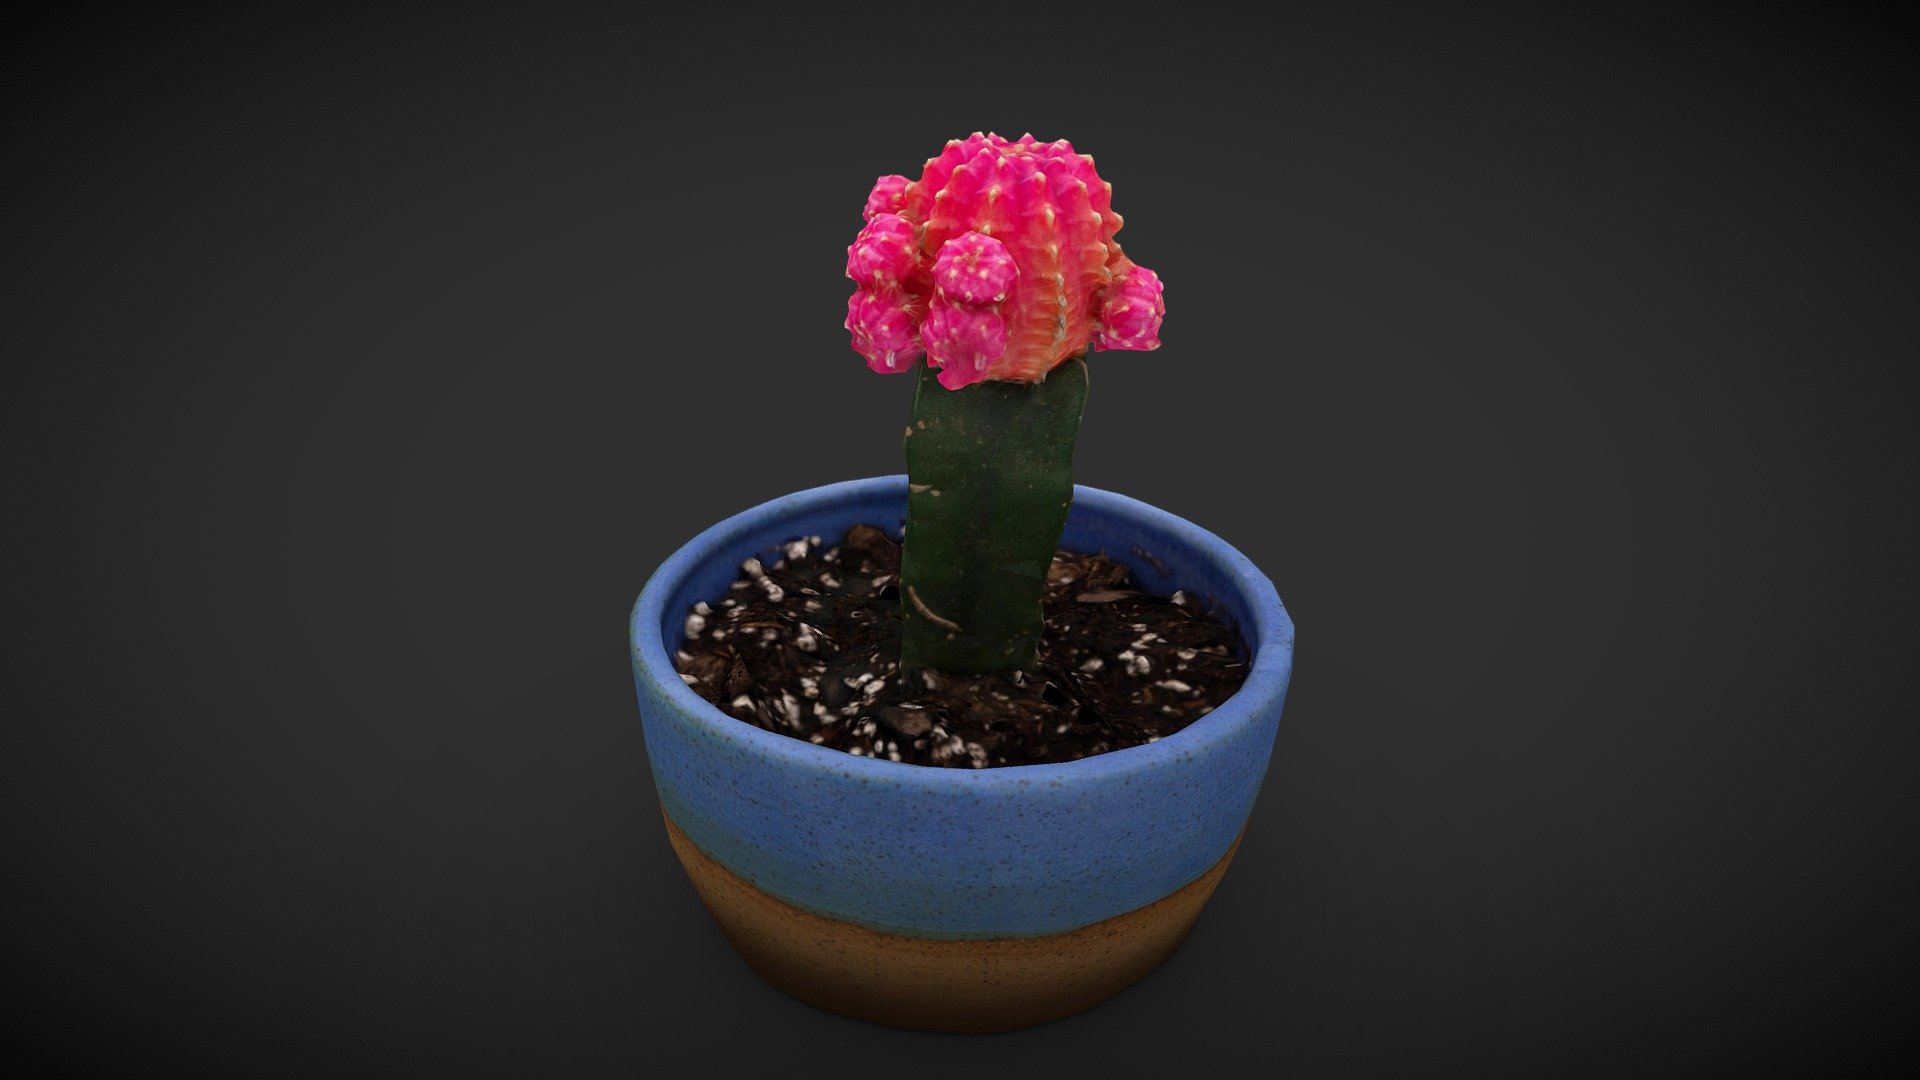 My entry for #LowPolyPlantChallenge. I used photogrammetry techniques to capture the cactus and optimize the model in 3ds Max 3d model